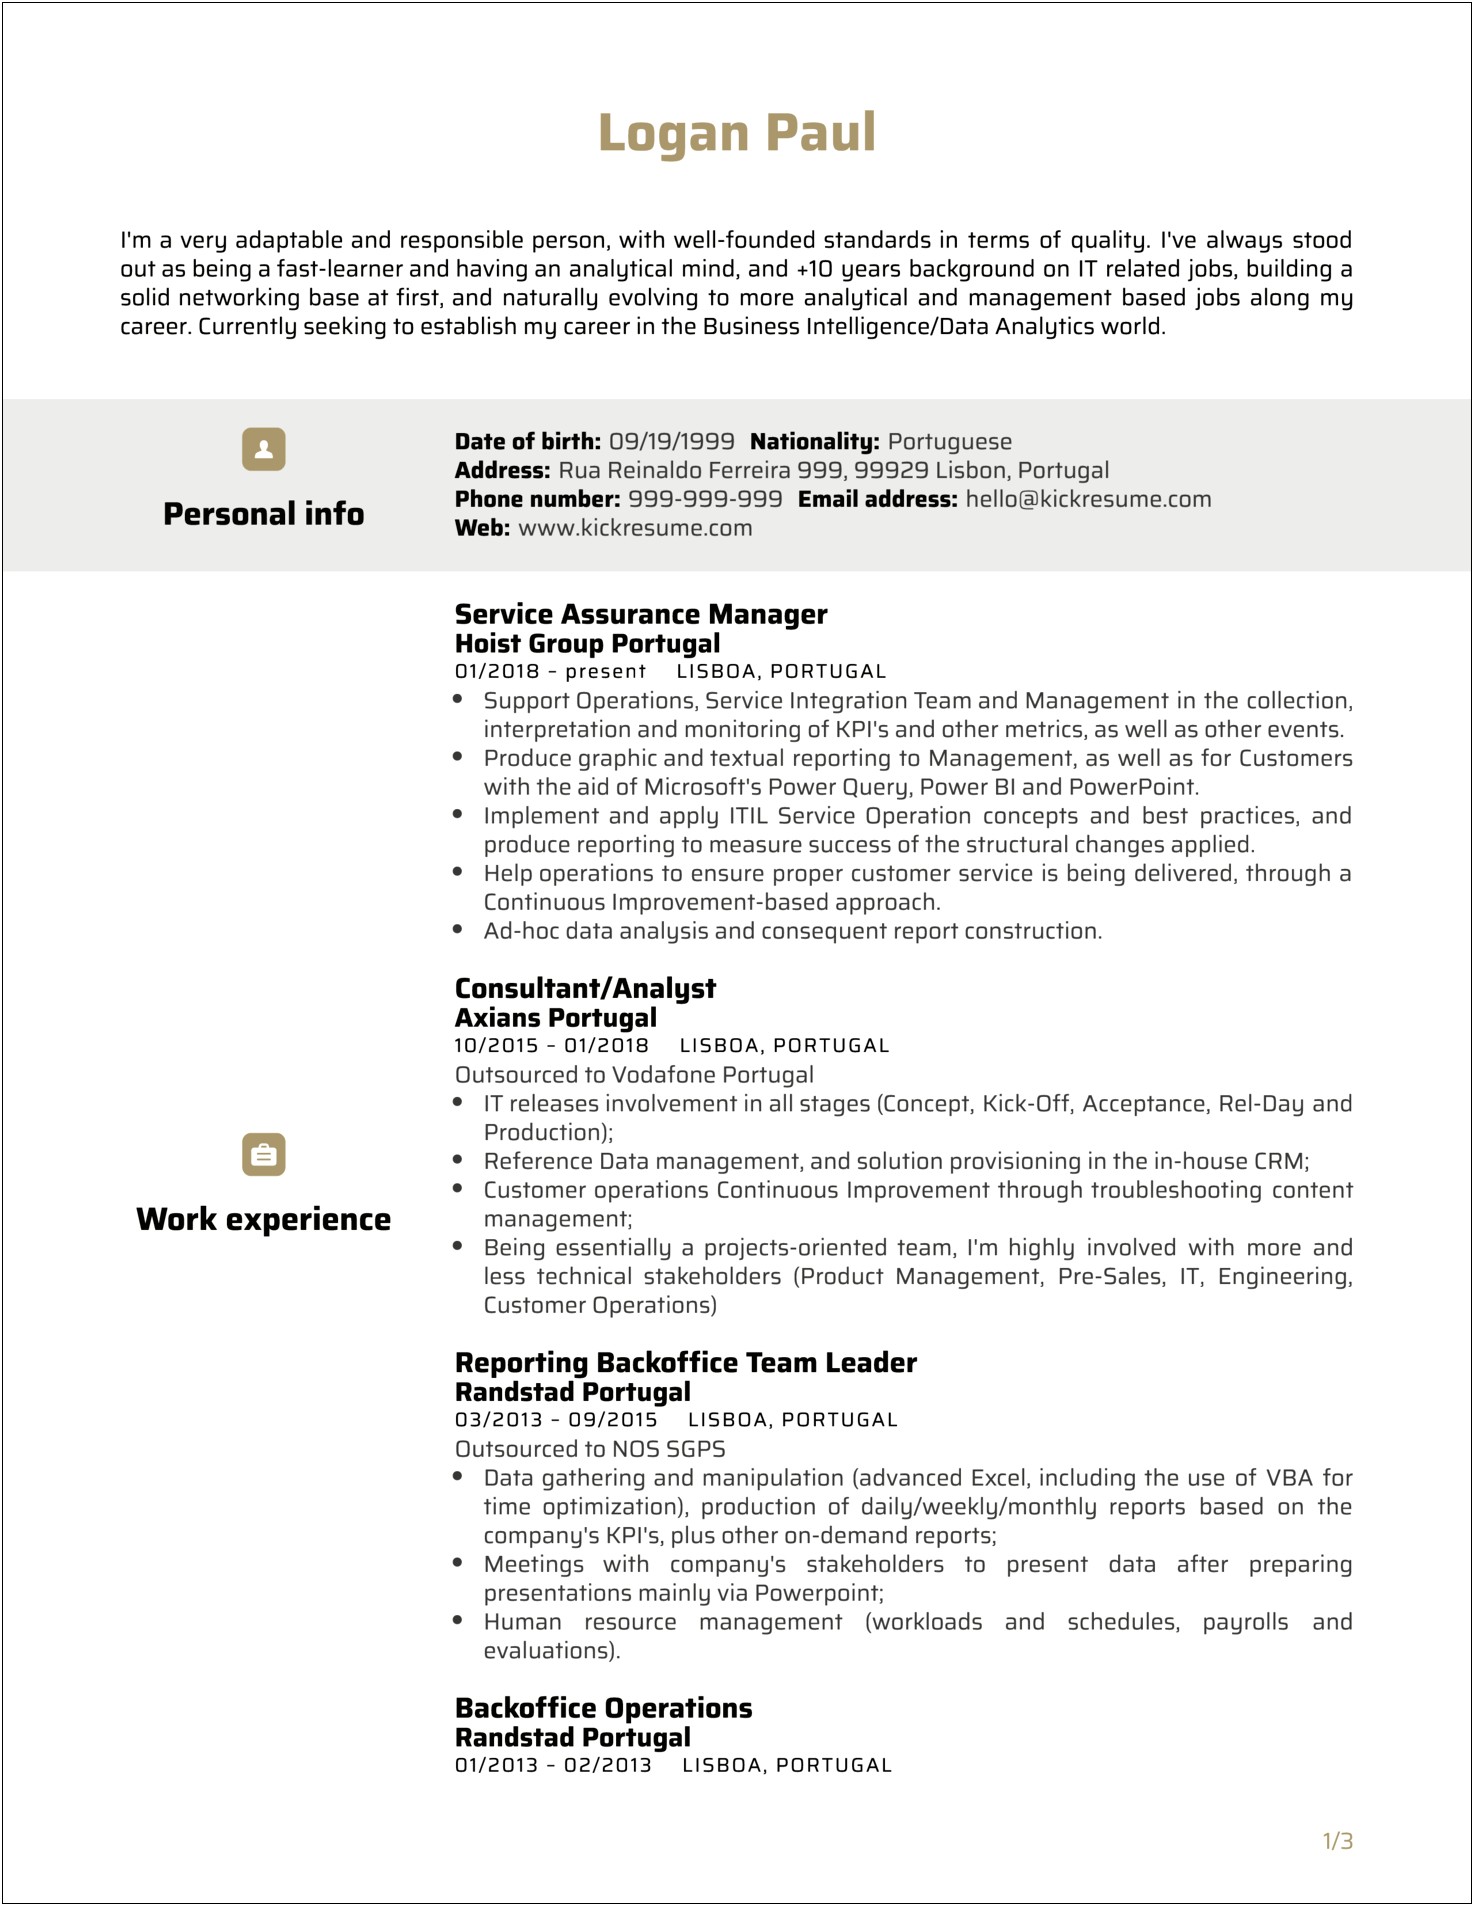 Resume Examples For Director Of Analytics